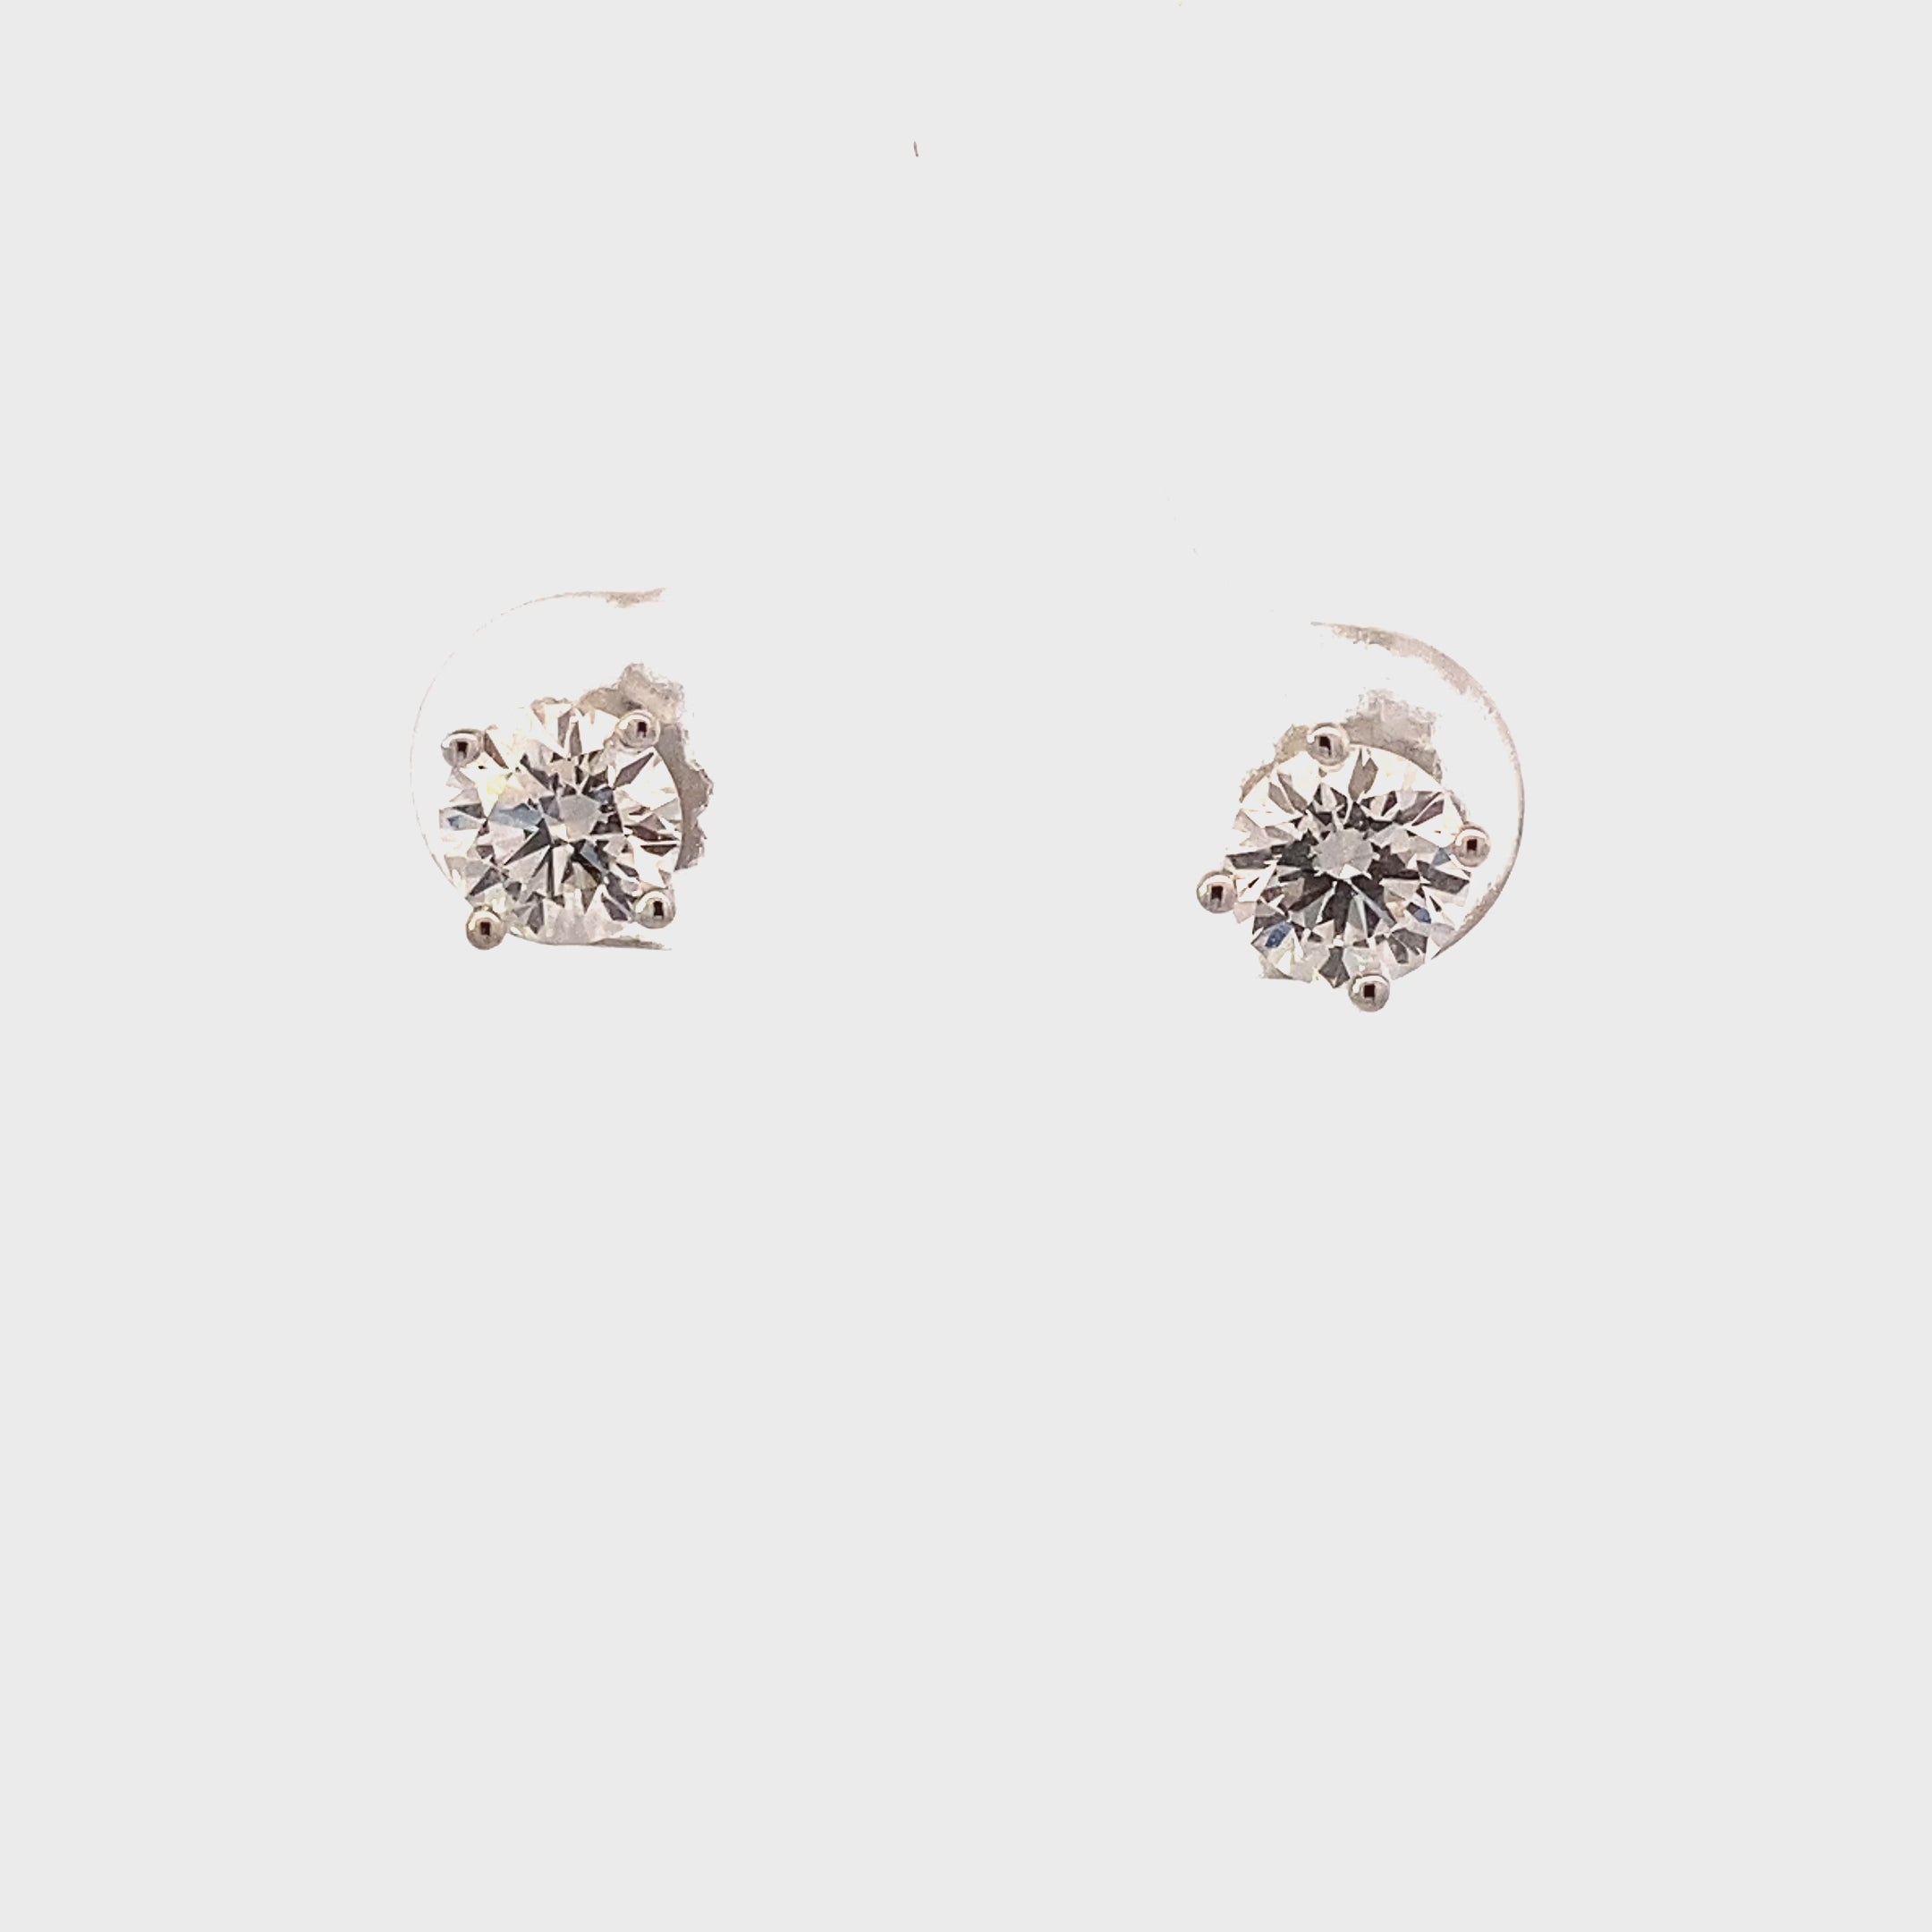 14K White Gold Lab Grown Diamond Solitaire Earrings - 1.06ct